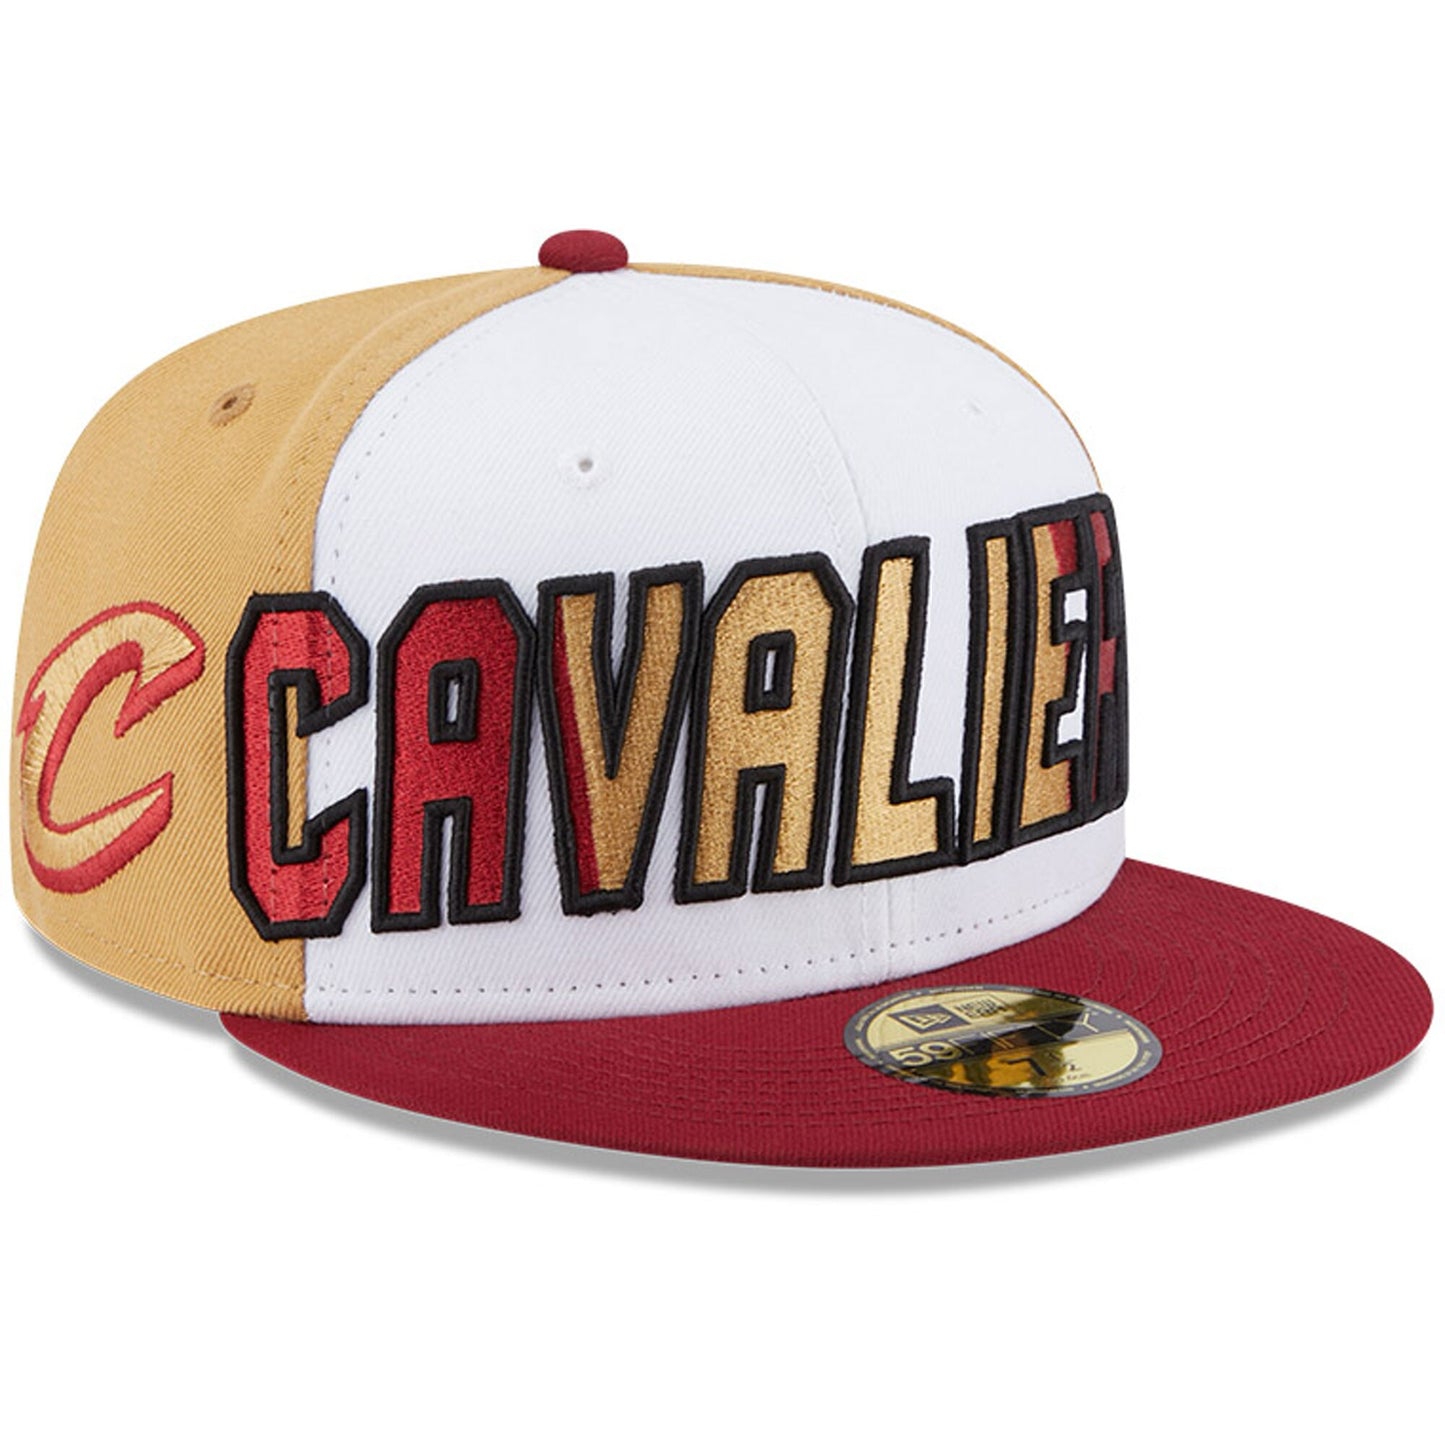 Cleveland Cavaliers New Era Back Half 9FIFTY Fitted Hat - White/Wine